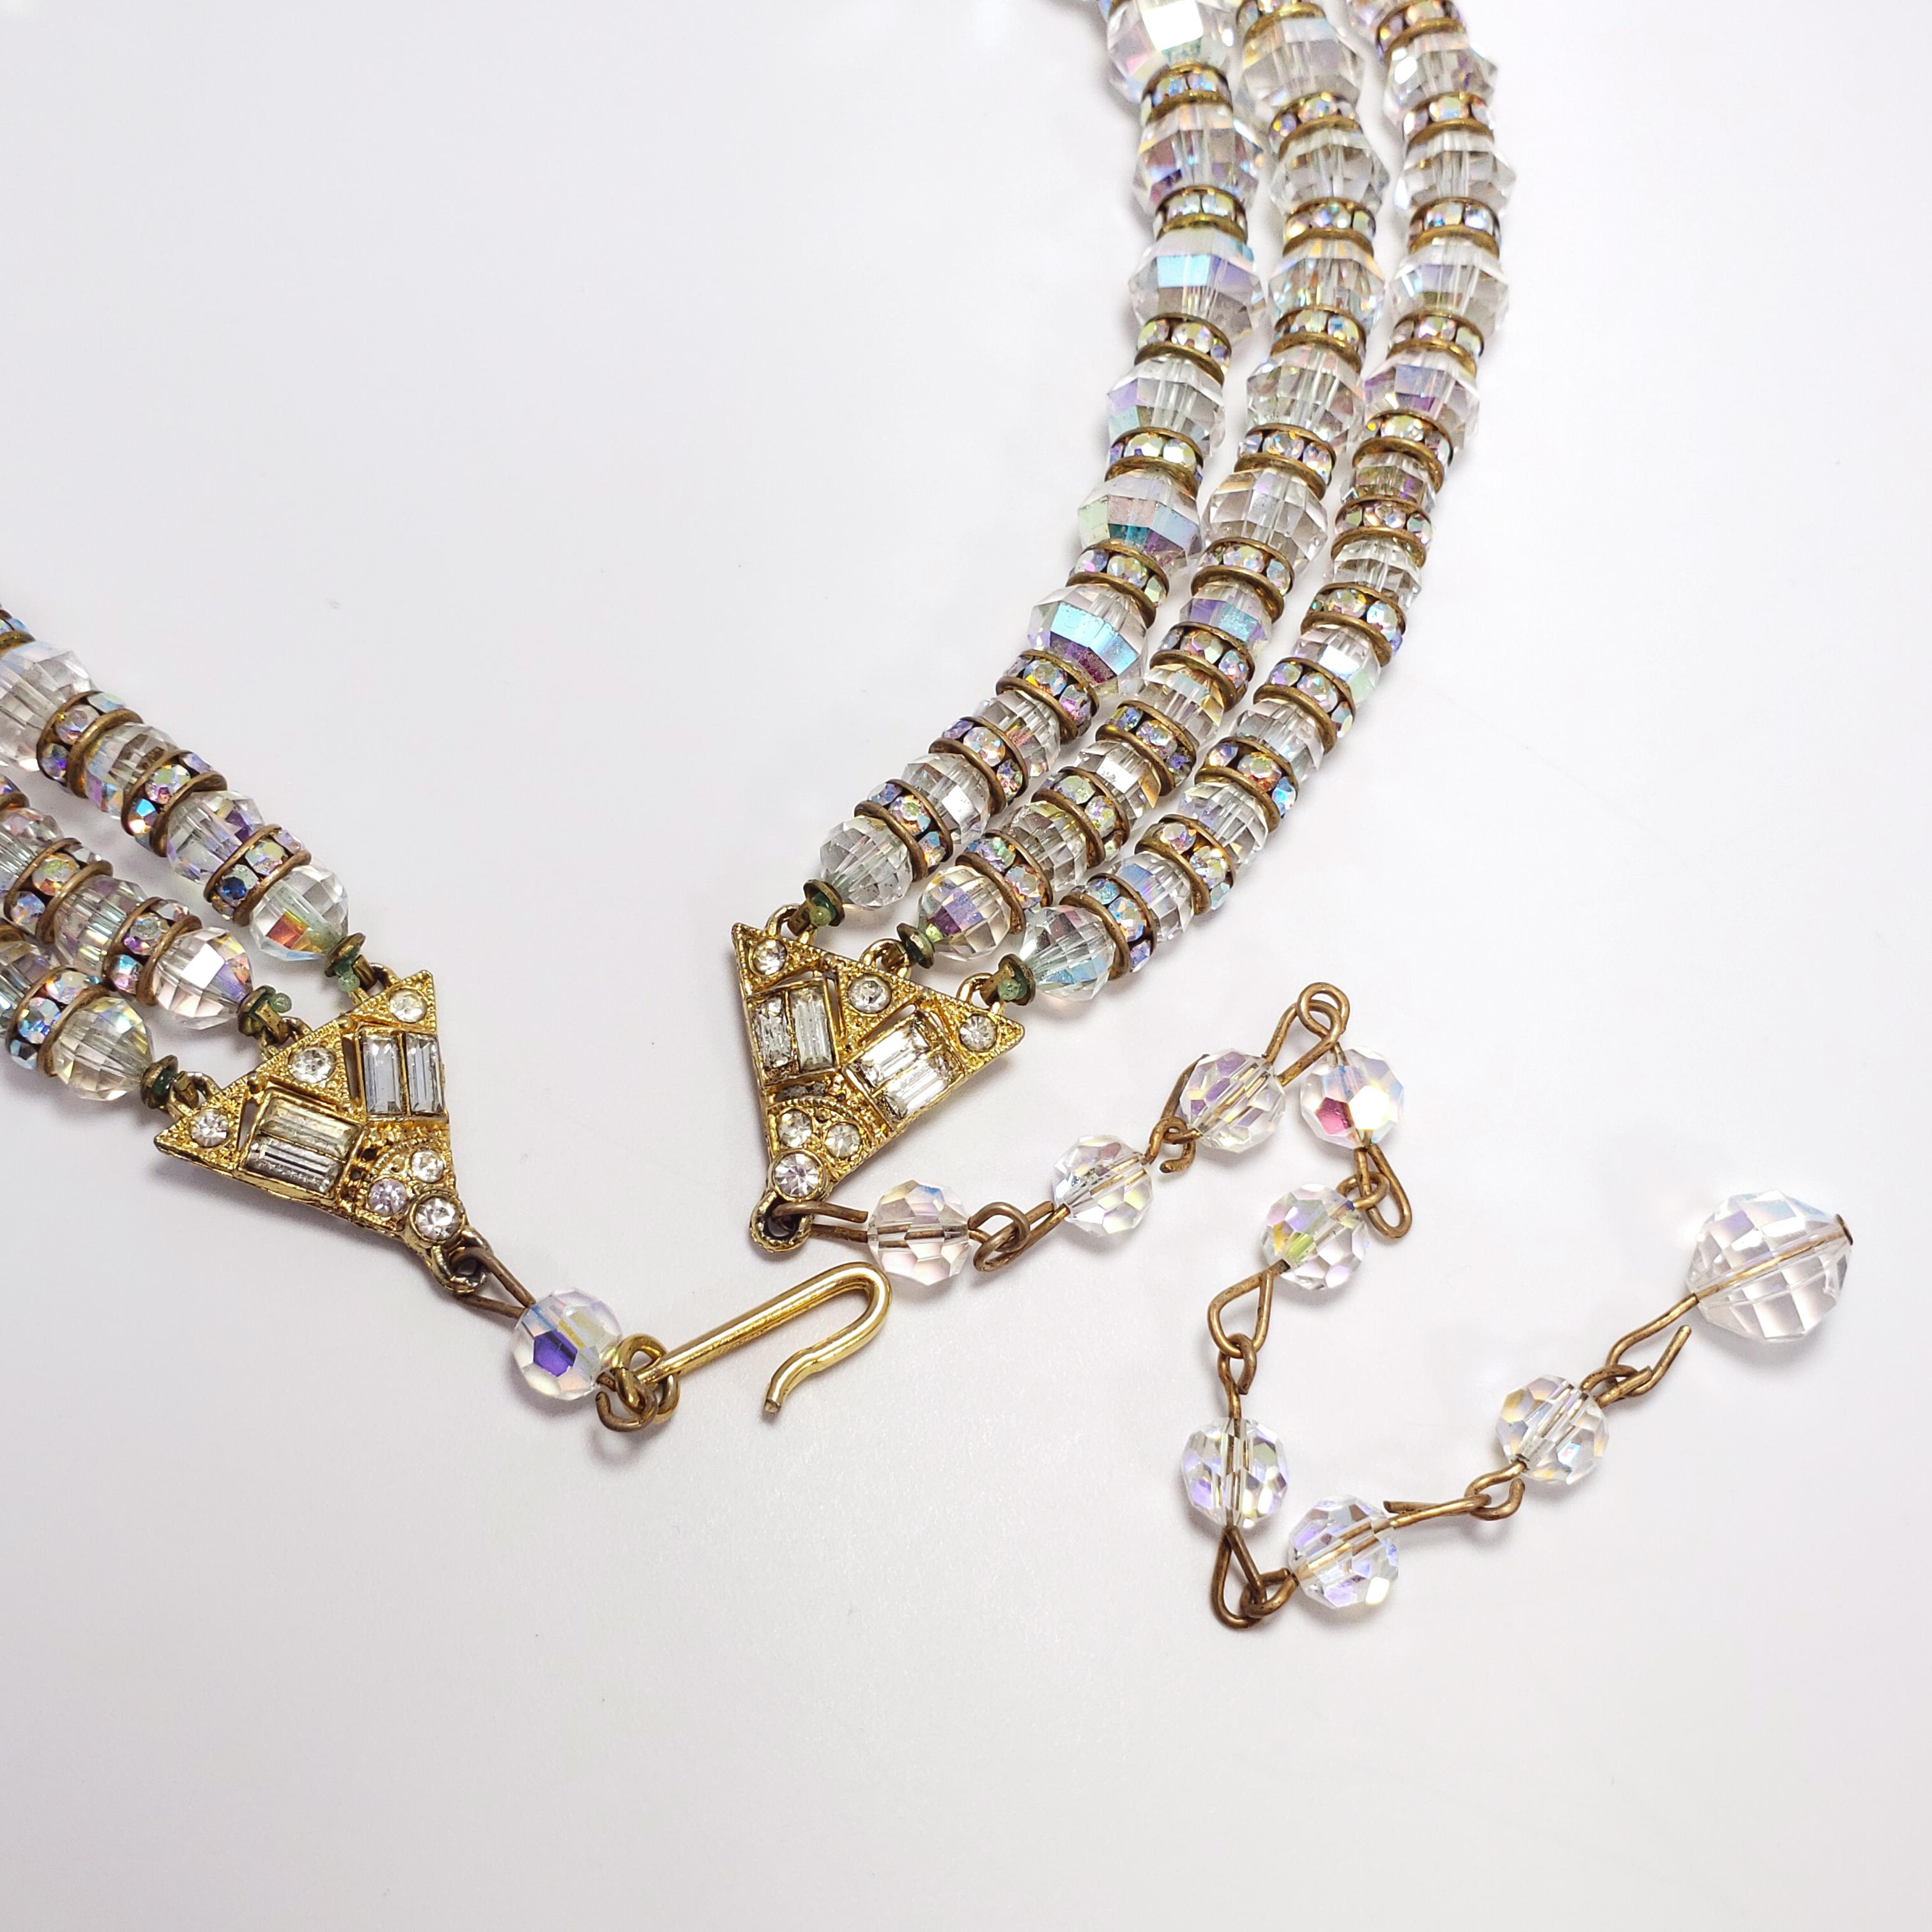 Women's or Men's Vendome Aurora Borealis Crystal Demi Parure Three Strand Necklace and Earrings